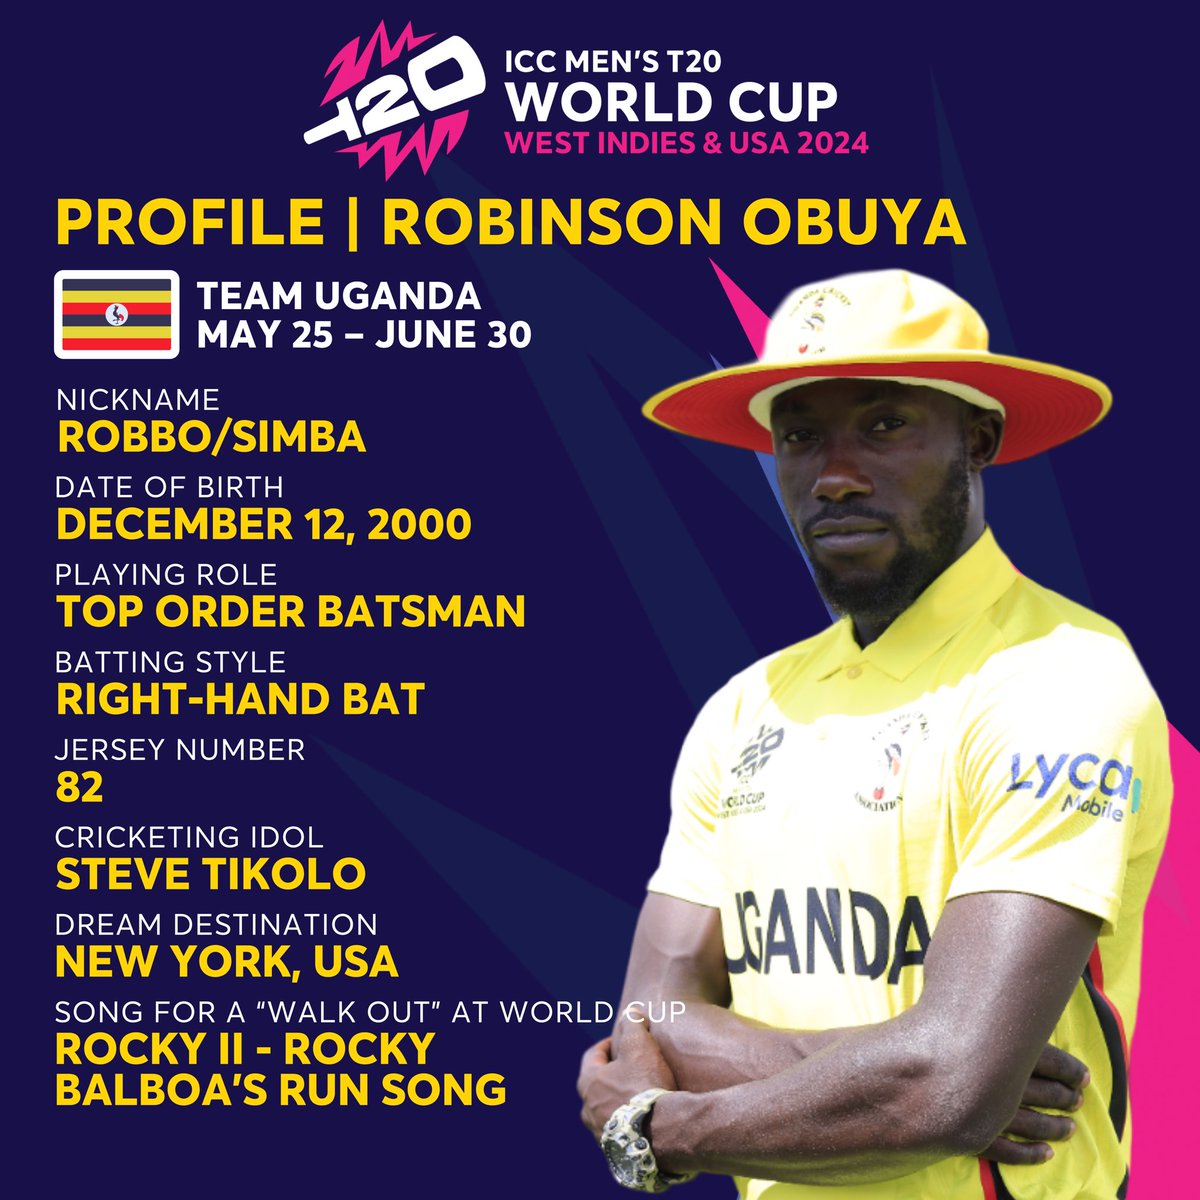 KNOW THE CRICKET CRANES #T20WorldCup SQUAD 

Nicknamed as Robbo, Robinson Obuya is known for stepping on the accelerator when the scoring rate needs a lift.  

Here's a snapshot of his profile!

#WeAreCricketCranes